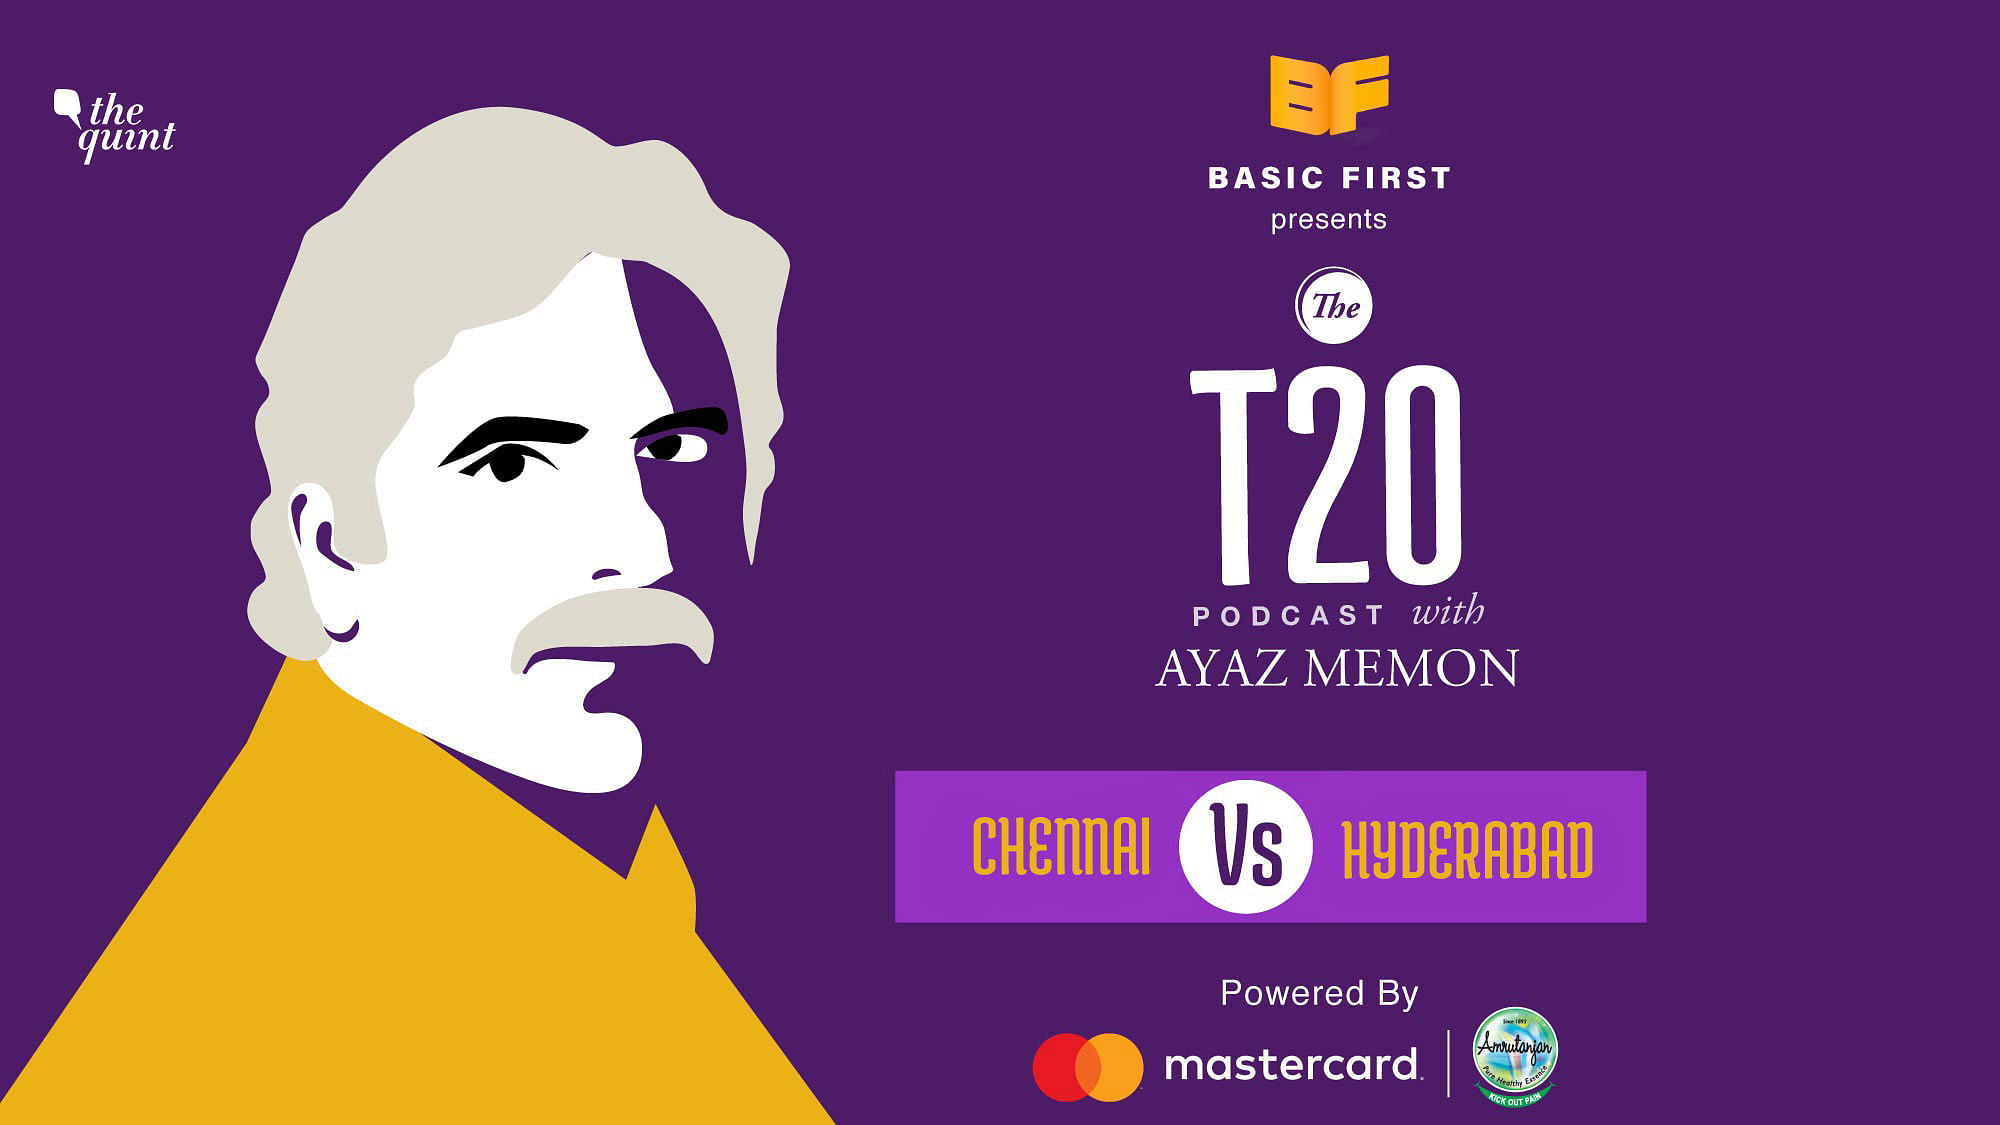 On Episode 29 of The T20 Podcast, Ayaz Memon and I talk about Chennai’s 20-run victory over Hyderabad on Tuesday night in Dubai.&nbsp;